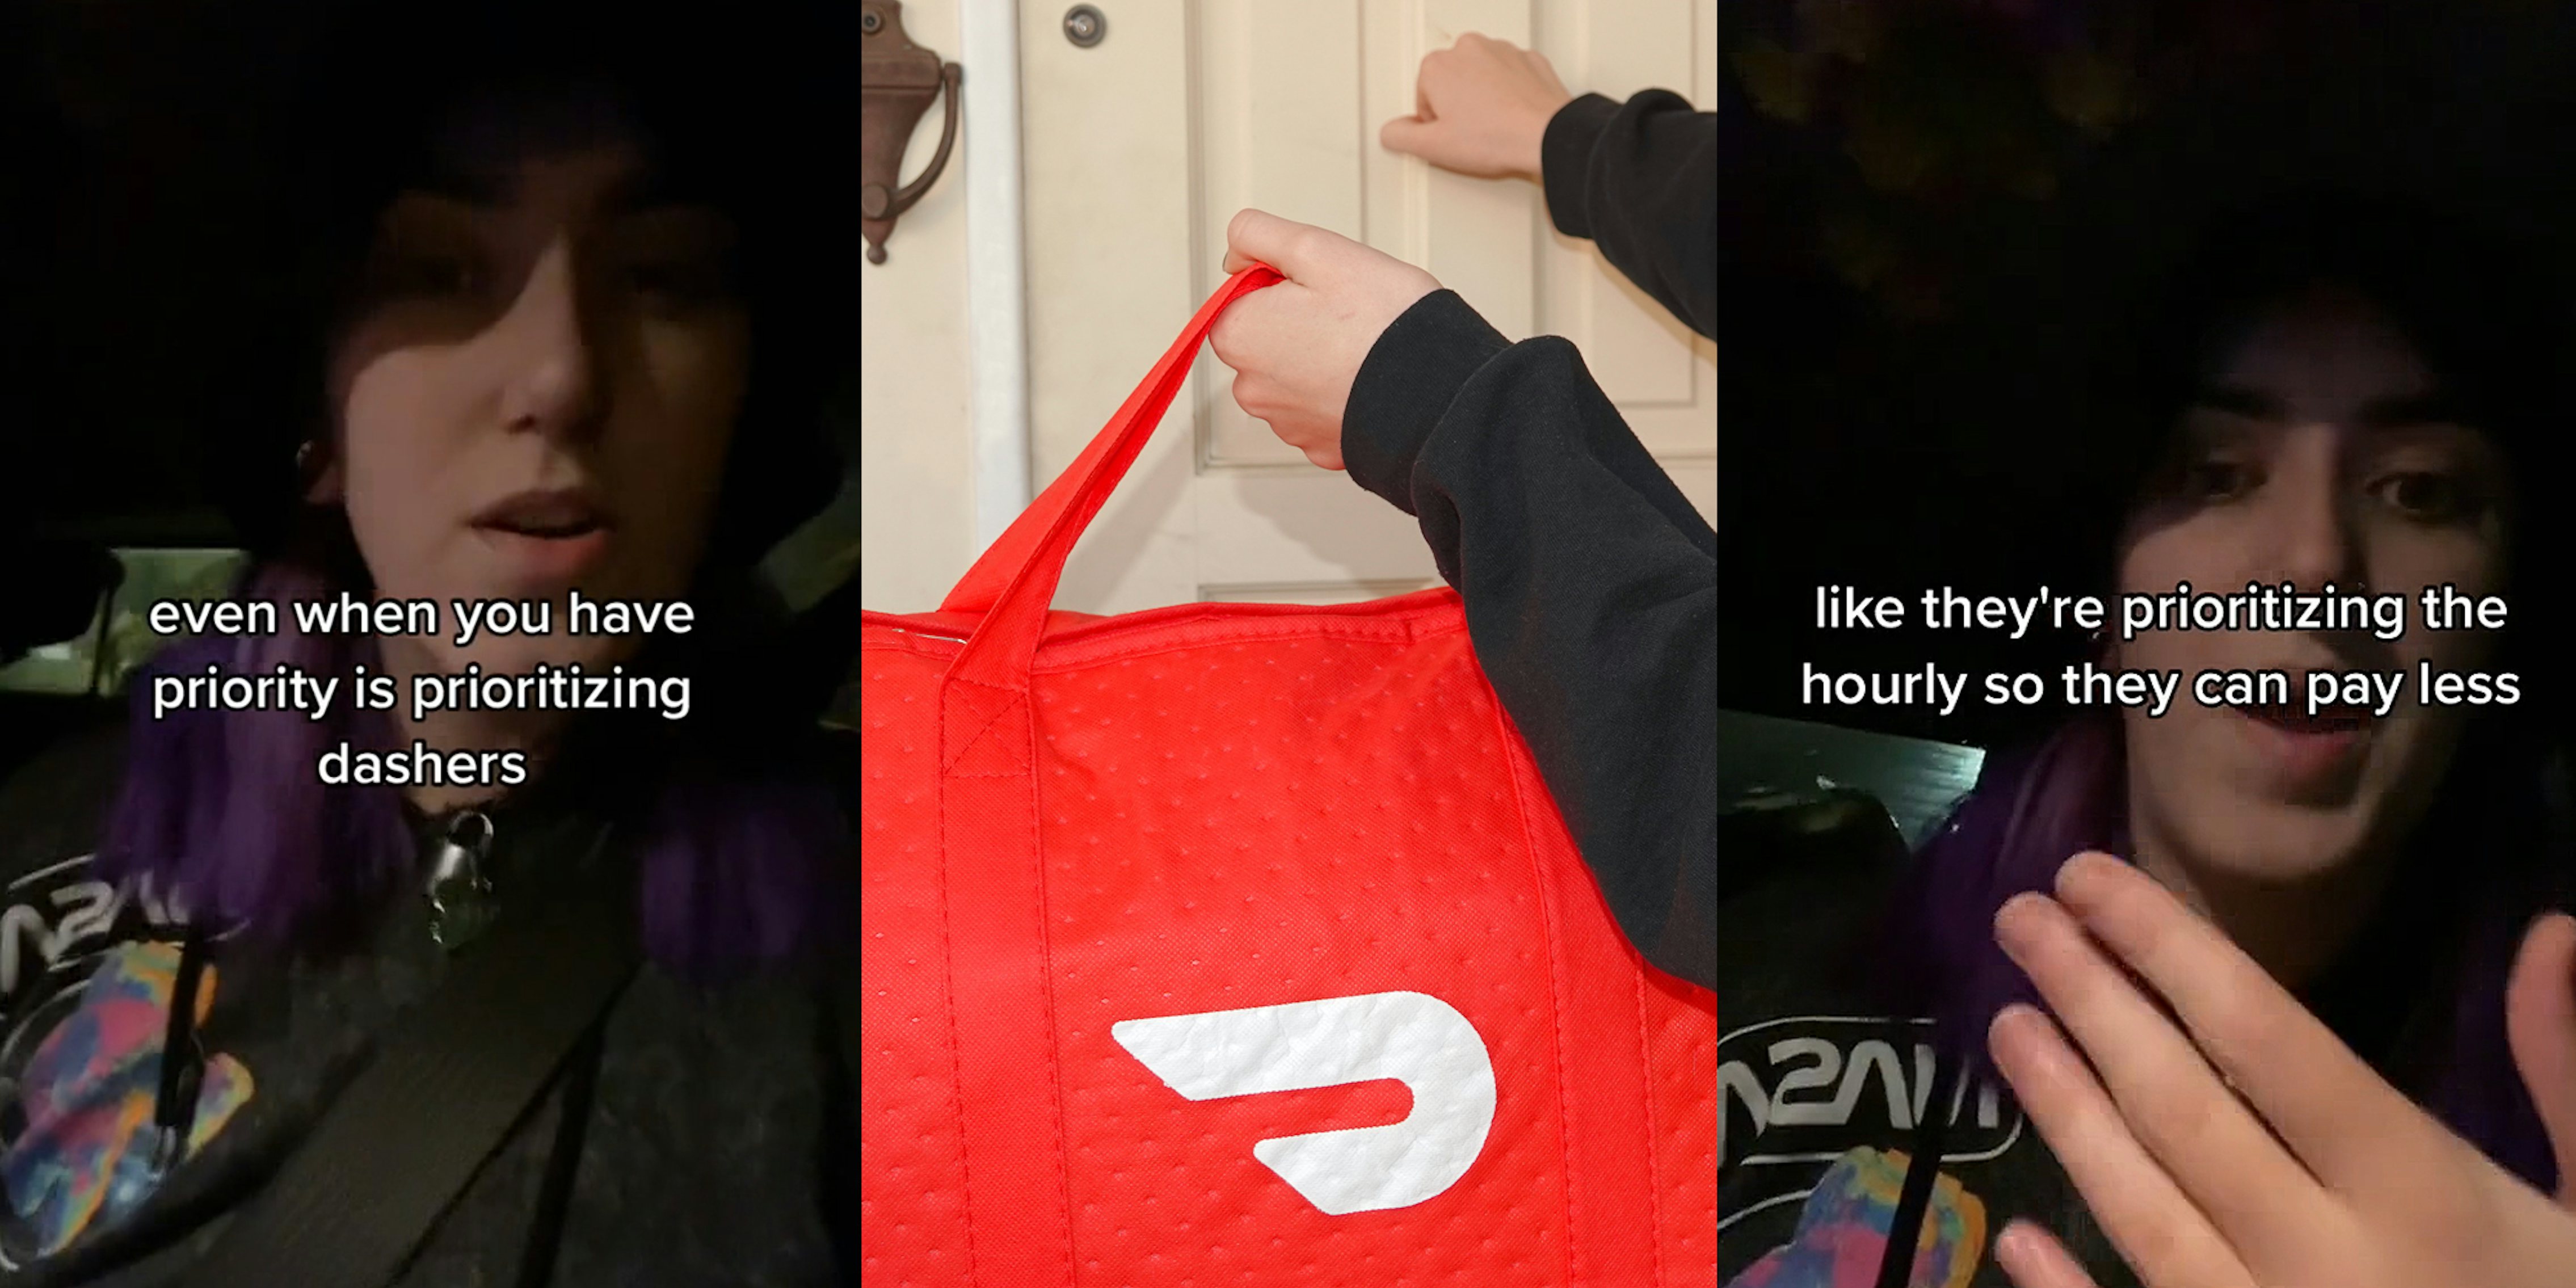 DoorDasher speaking in car caption 'even when you have priority is prioritizing dashers' (l) DoorDash employee knocking on door with delivery bag in hand (c) DoorDasher speaking in car caption 'like they're prioritizing the hourly so they can pay less' (r)